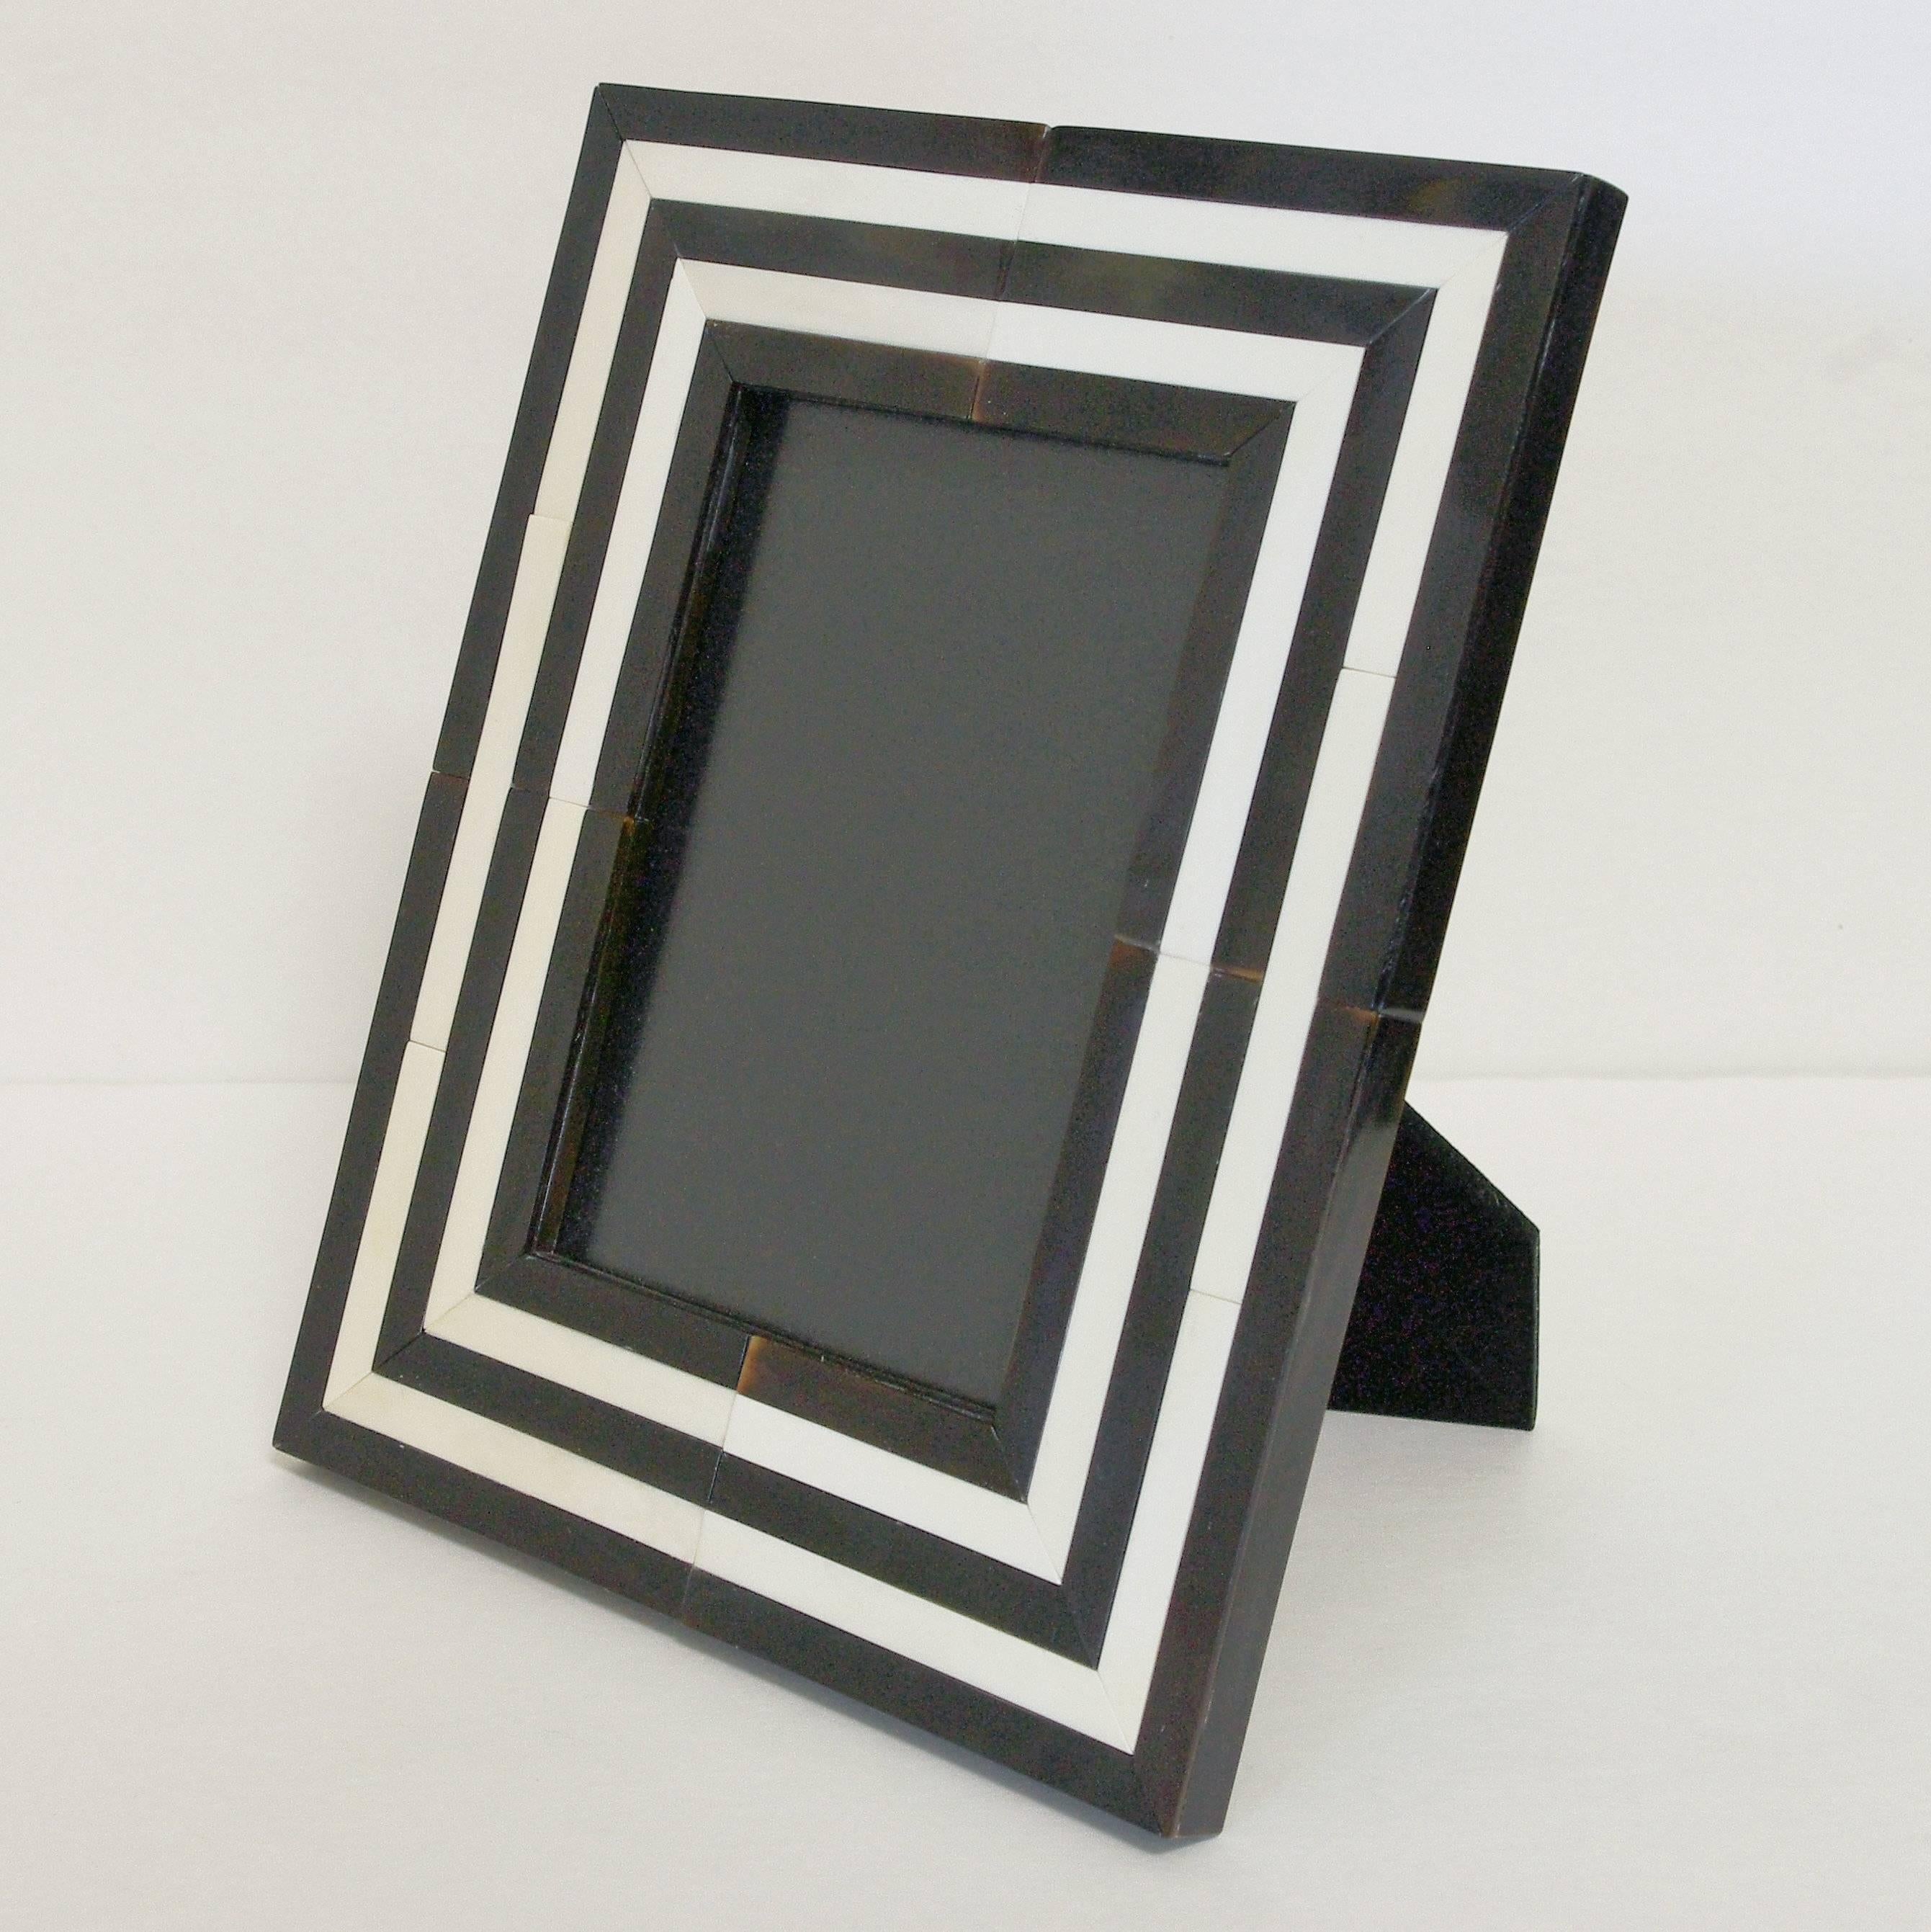 White and black horn photo frame by Fabio Ltd
Height 9.5 inches / Width 8.5 inches / Depth 6.5 inches
Photo size: 5 inches by 7 inches
1 in stock in Palm Springs currently ON 30% OFF SALE for $413 !!!
Order Reference #: FABIOLTD MR57
This piece